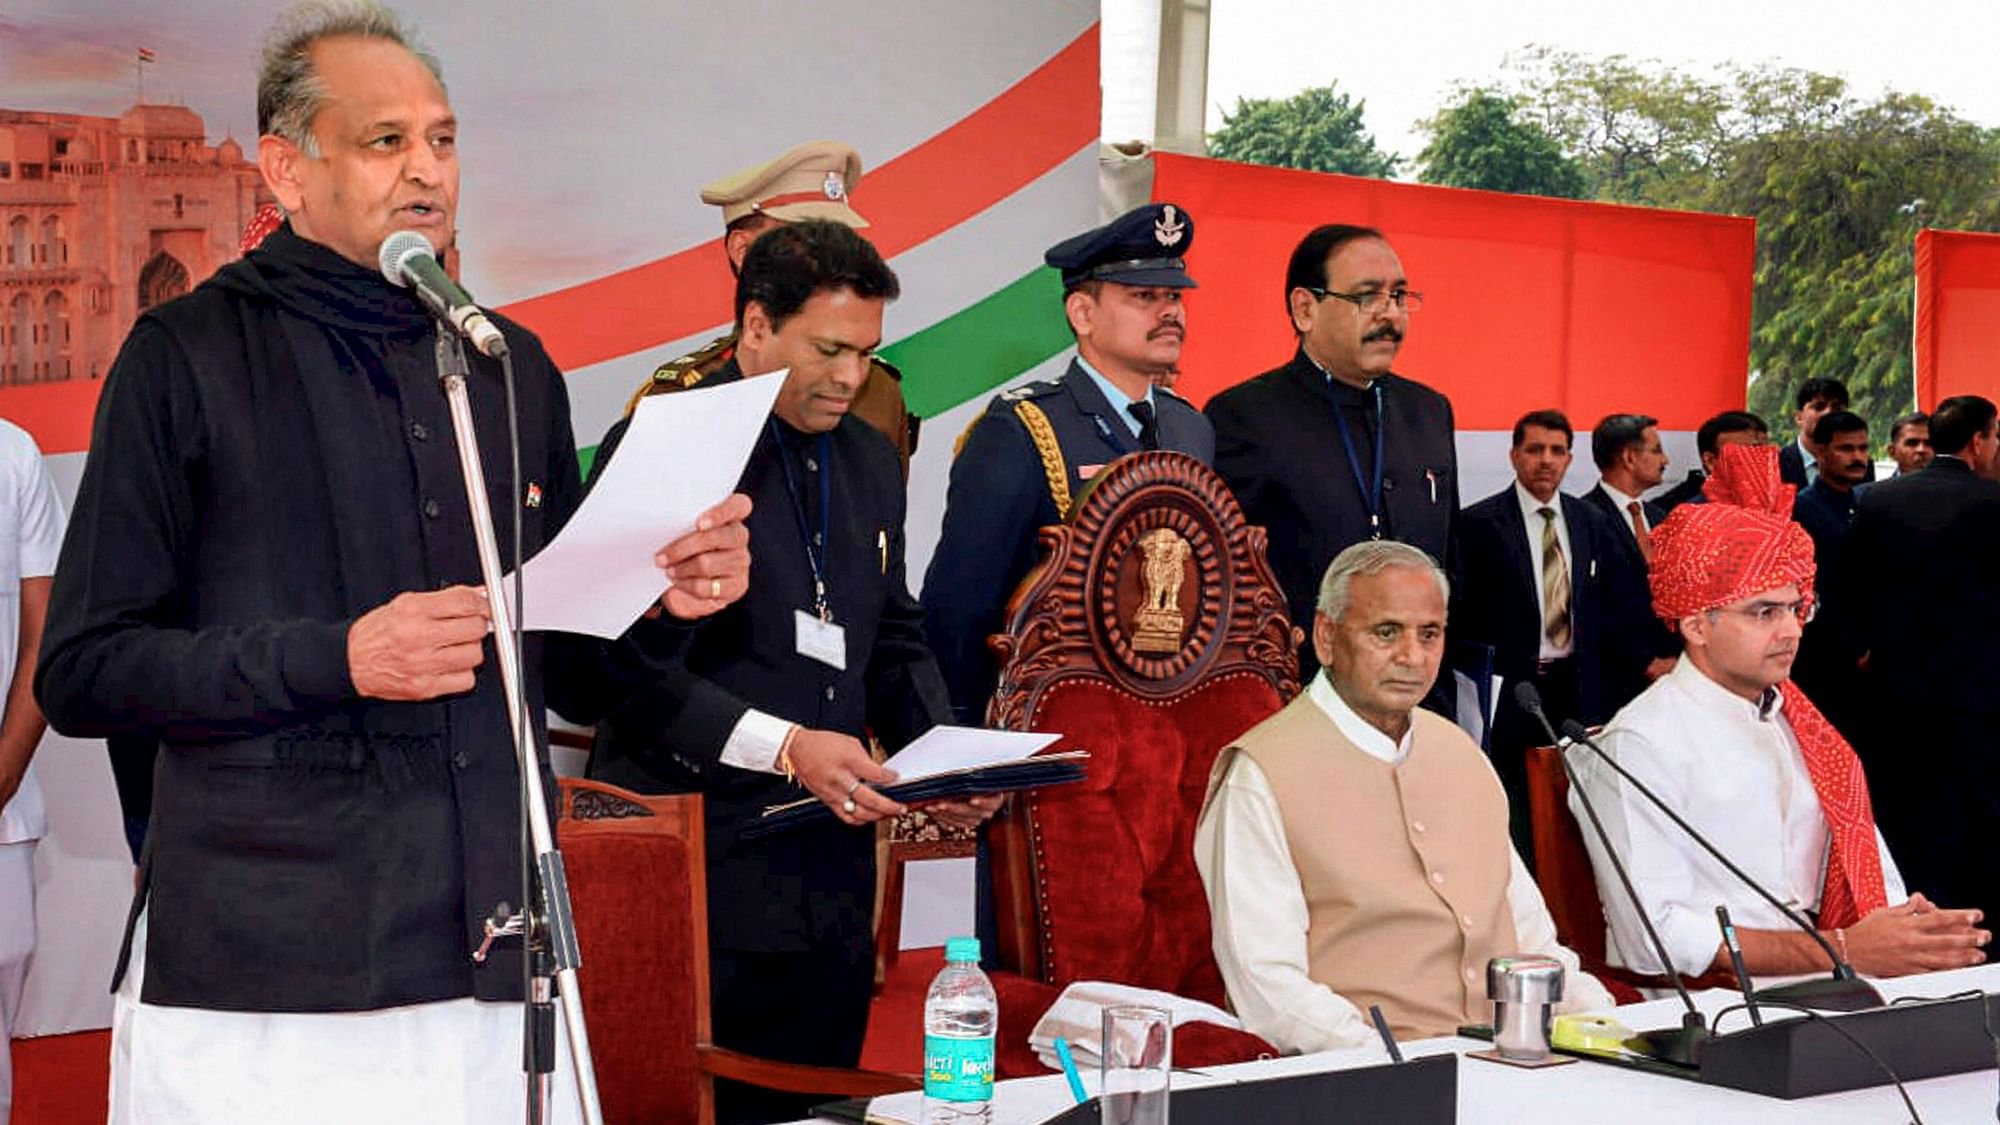 Ashok Gehlot and Sachin Pilot took oath as chief minister and deputy chief minister of Rajasthan respectively, on 17 December.